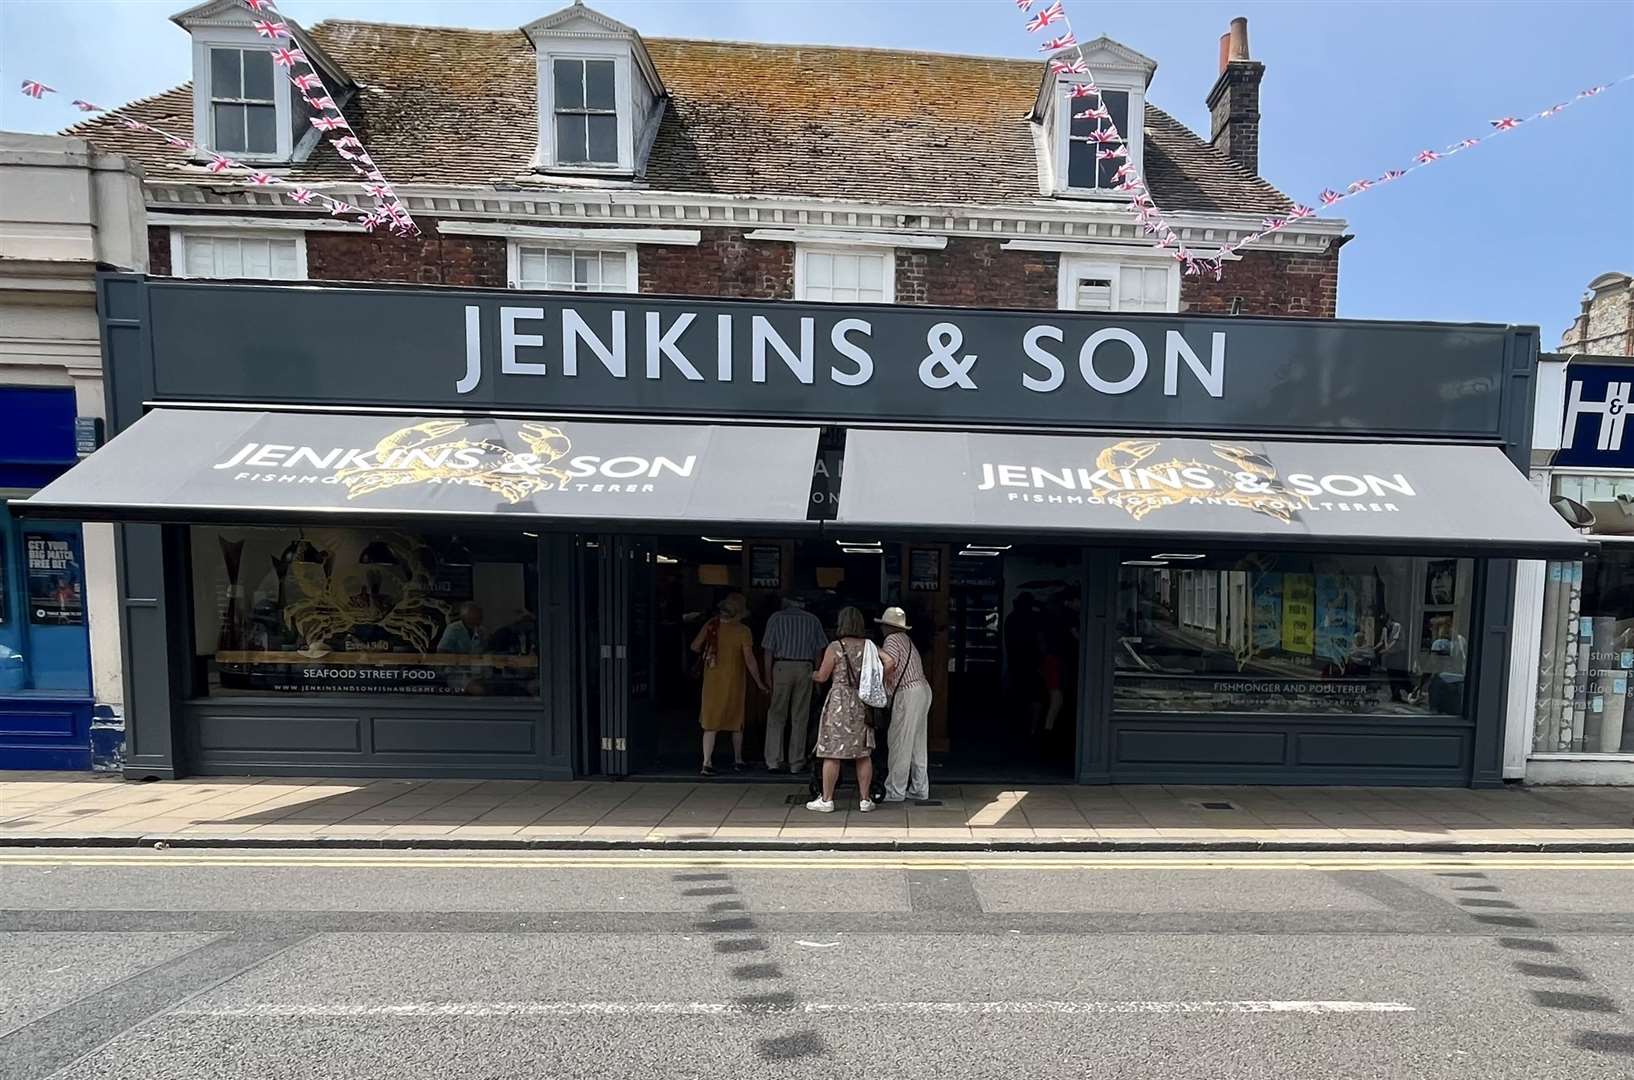 Jenkins & Son has been granted an alcohol licence for its new site in the former JC Rook & Son unit in Deal high street